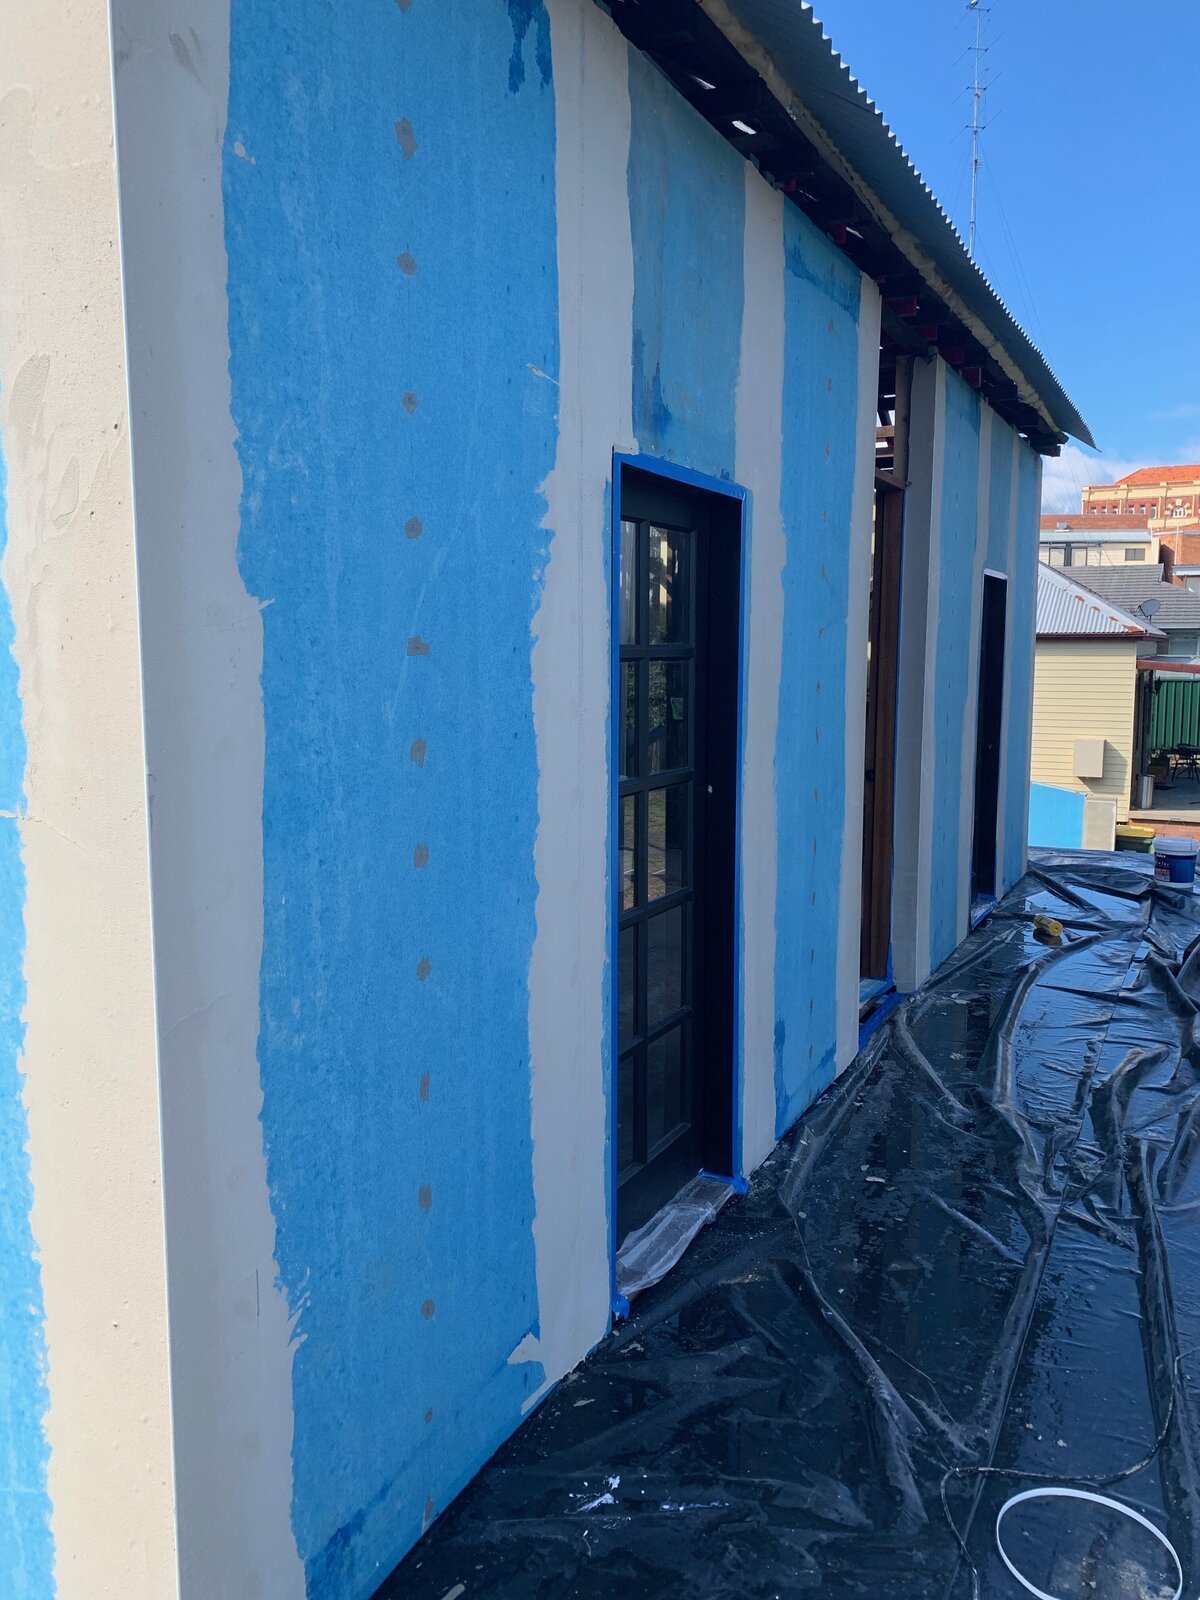 render central coast finesse rendering is the best cement rendering company on the central coast. Using the best brands like dulux render and dulux texture. You'll love your new rendered house